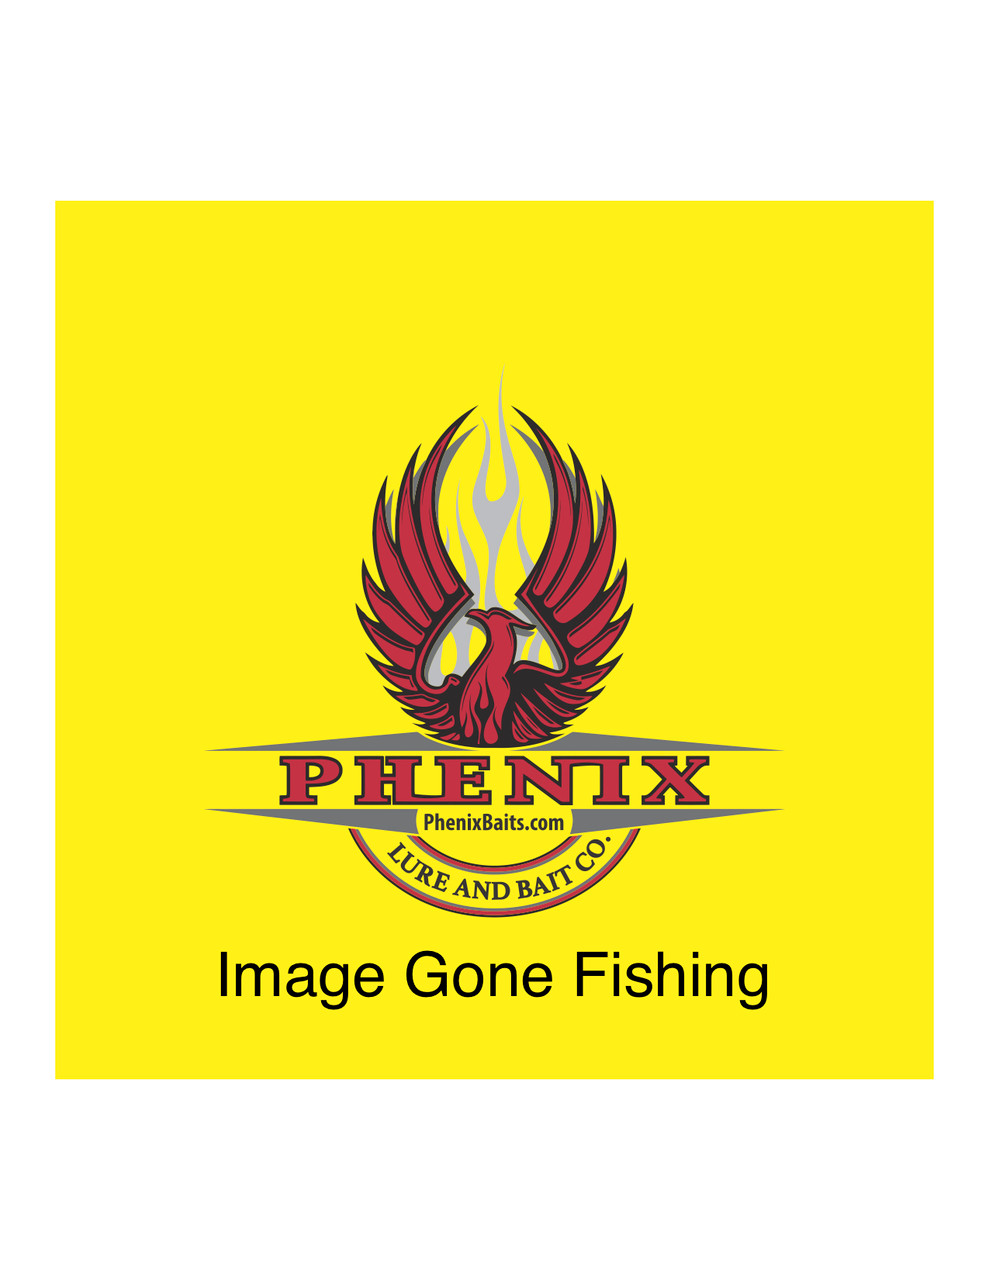 https://cdn11.bigcommerce.com/s-r0zrlxkwt/images/stencil/1280x1280/products/1153/1815/Image_Gone_Fishing__11026.1696893145.jpg?c=1